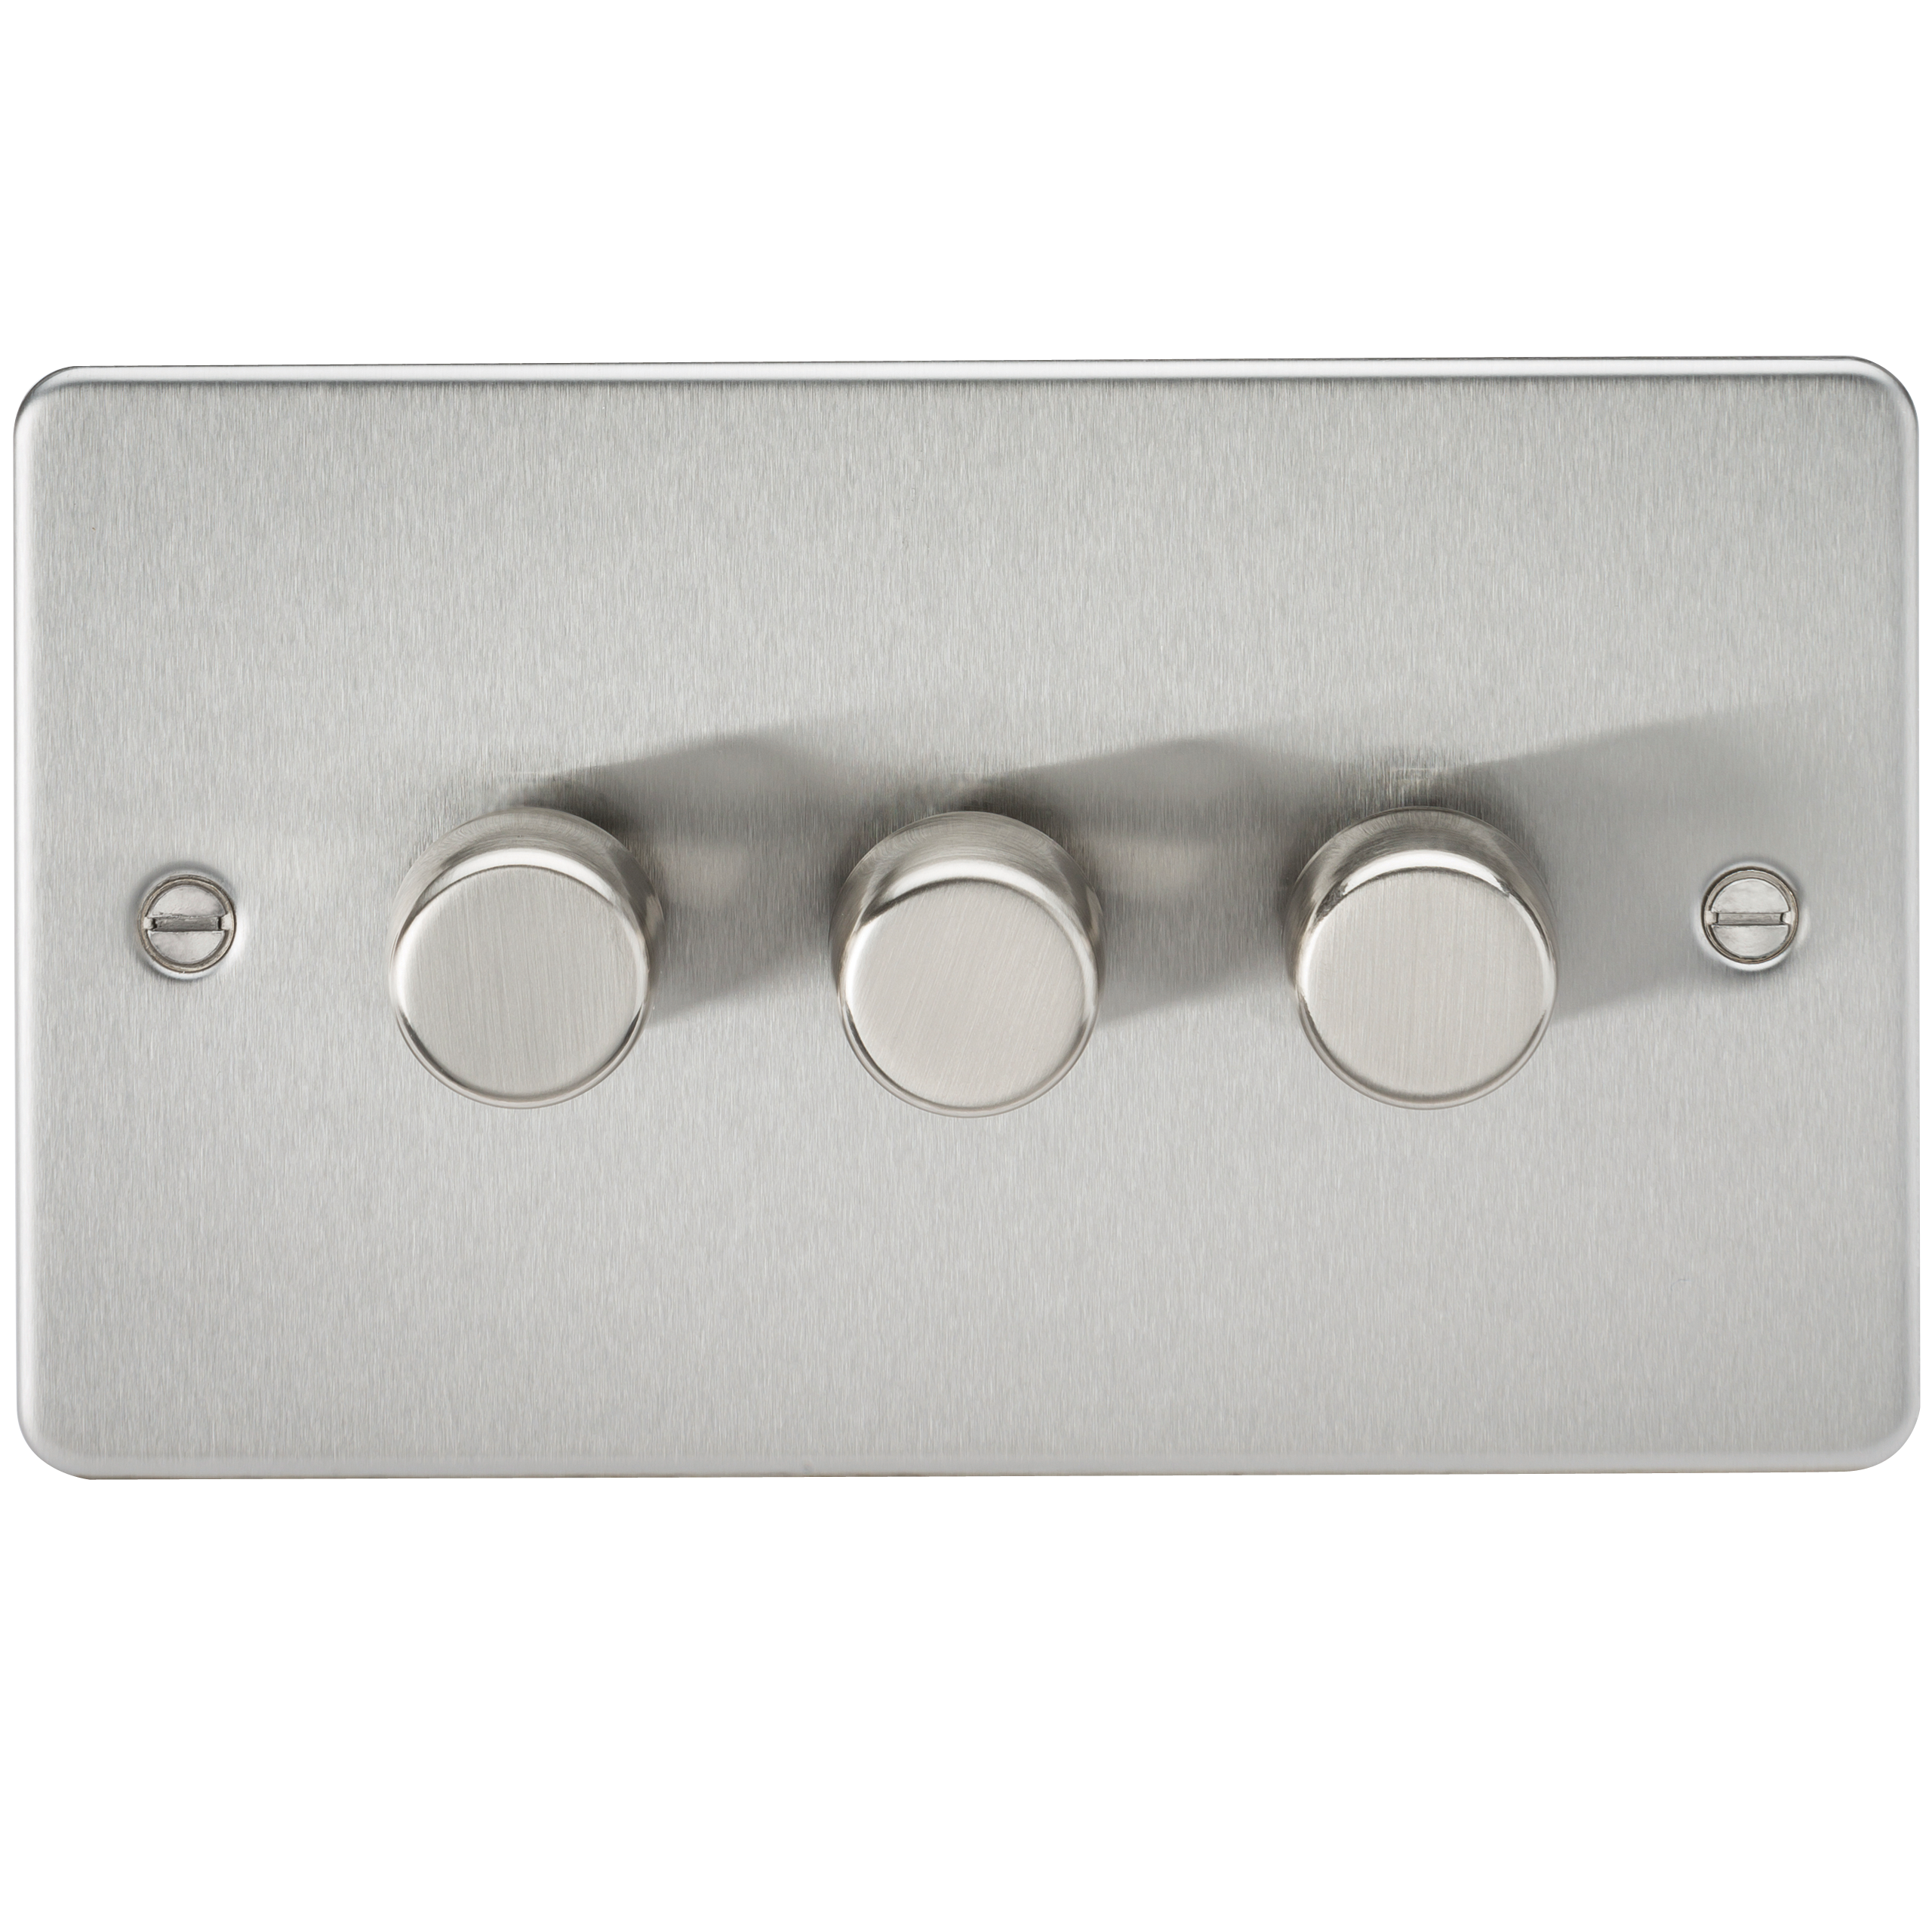 FLAT PLATE 3G 2 WAY 40-400W DIMMER - BRUSHED CHROME - FP2173BC 